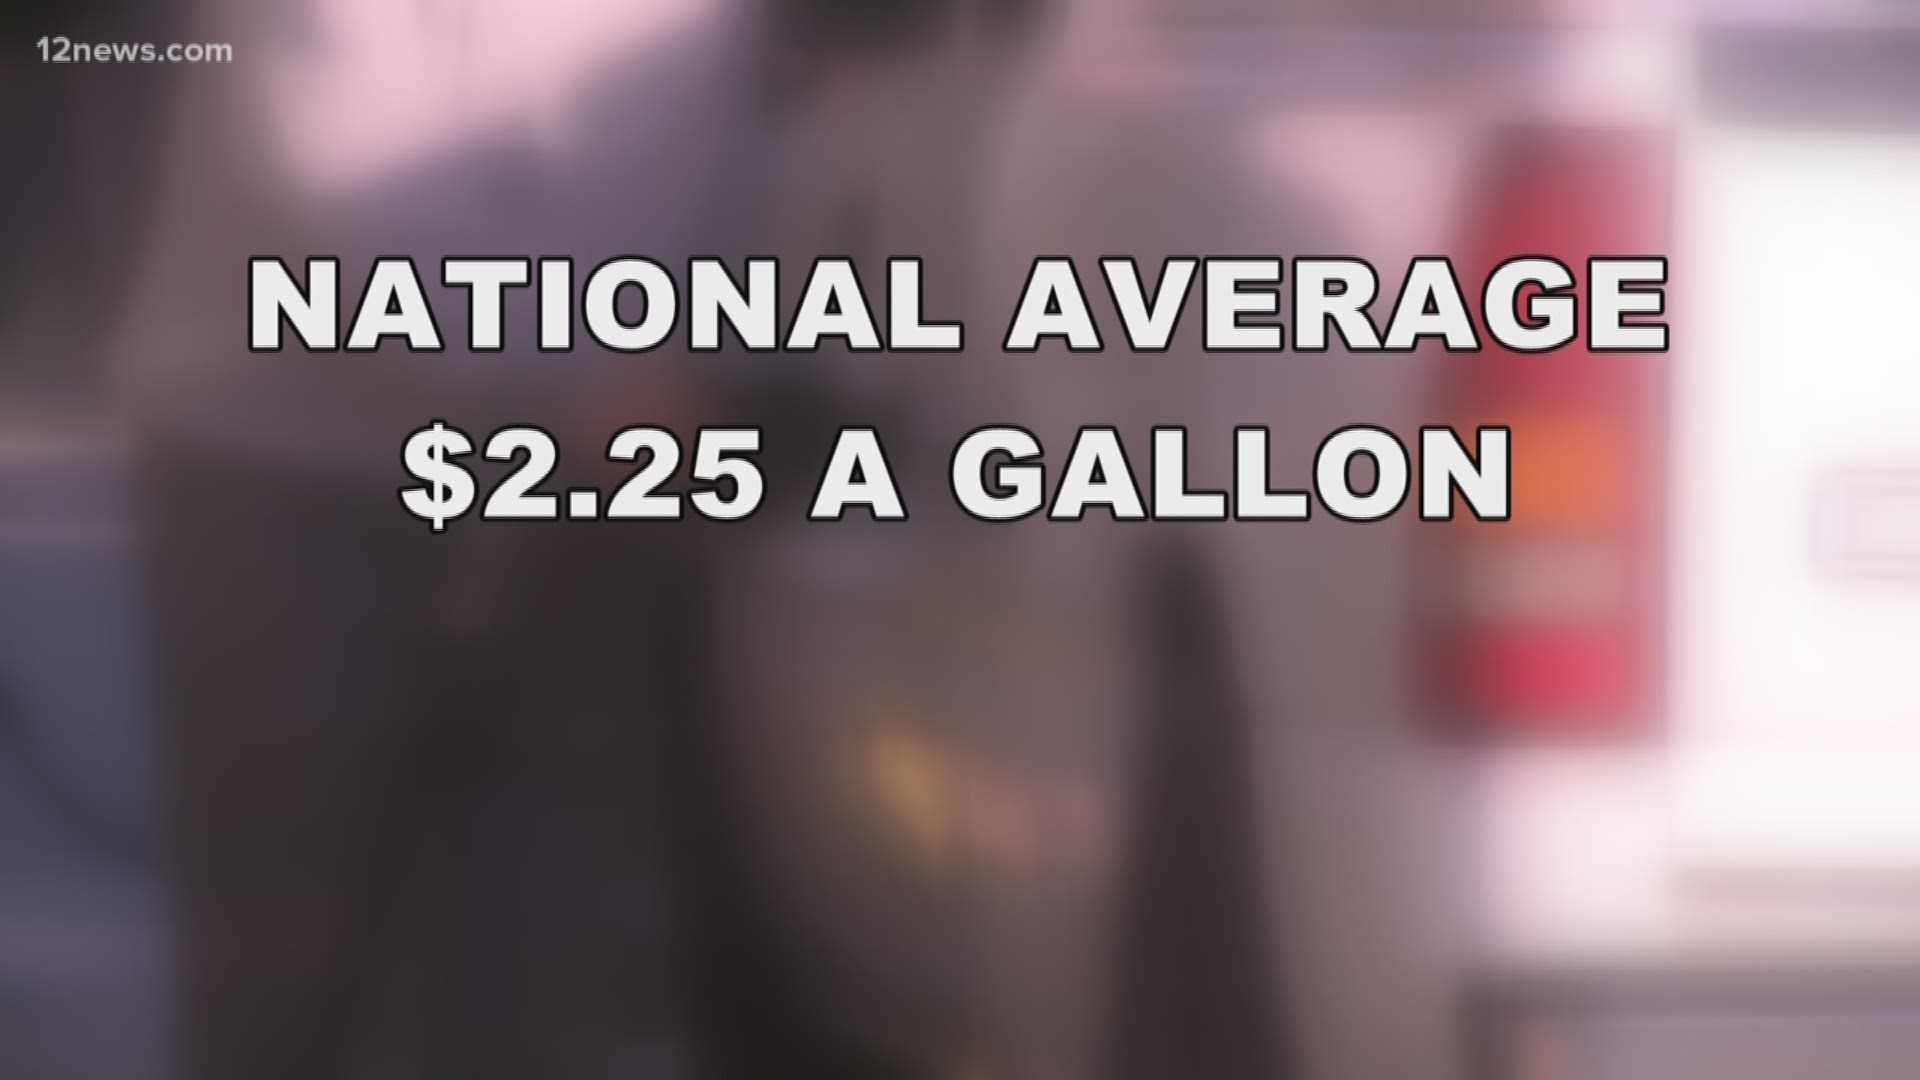 We are paying more at the pump due to regional issues and inventory, but we can expect gas prices to drop in the near future.